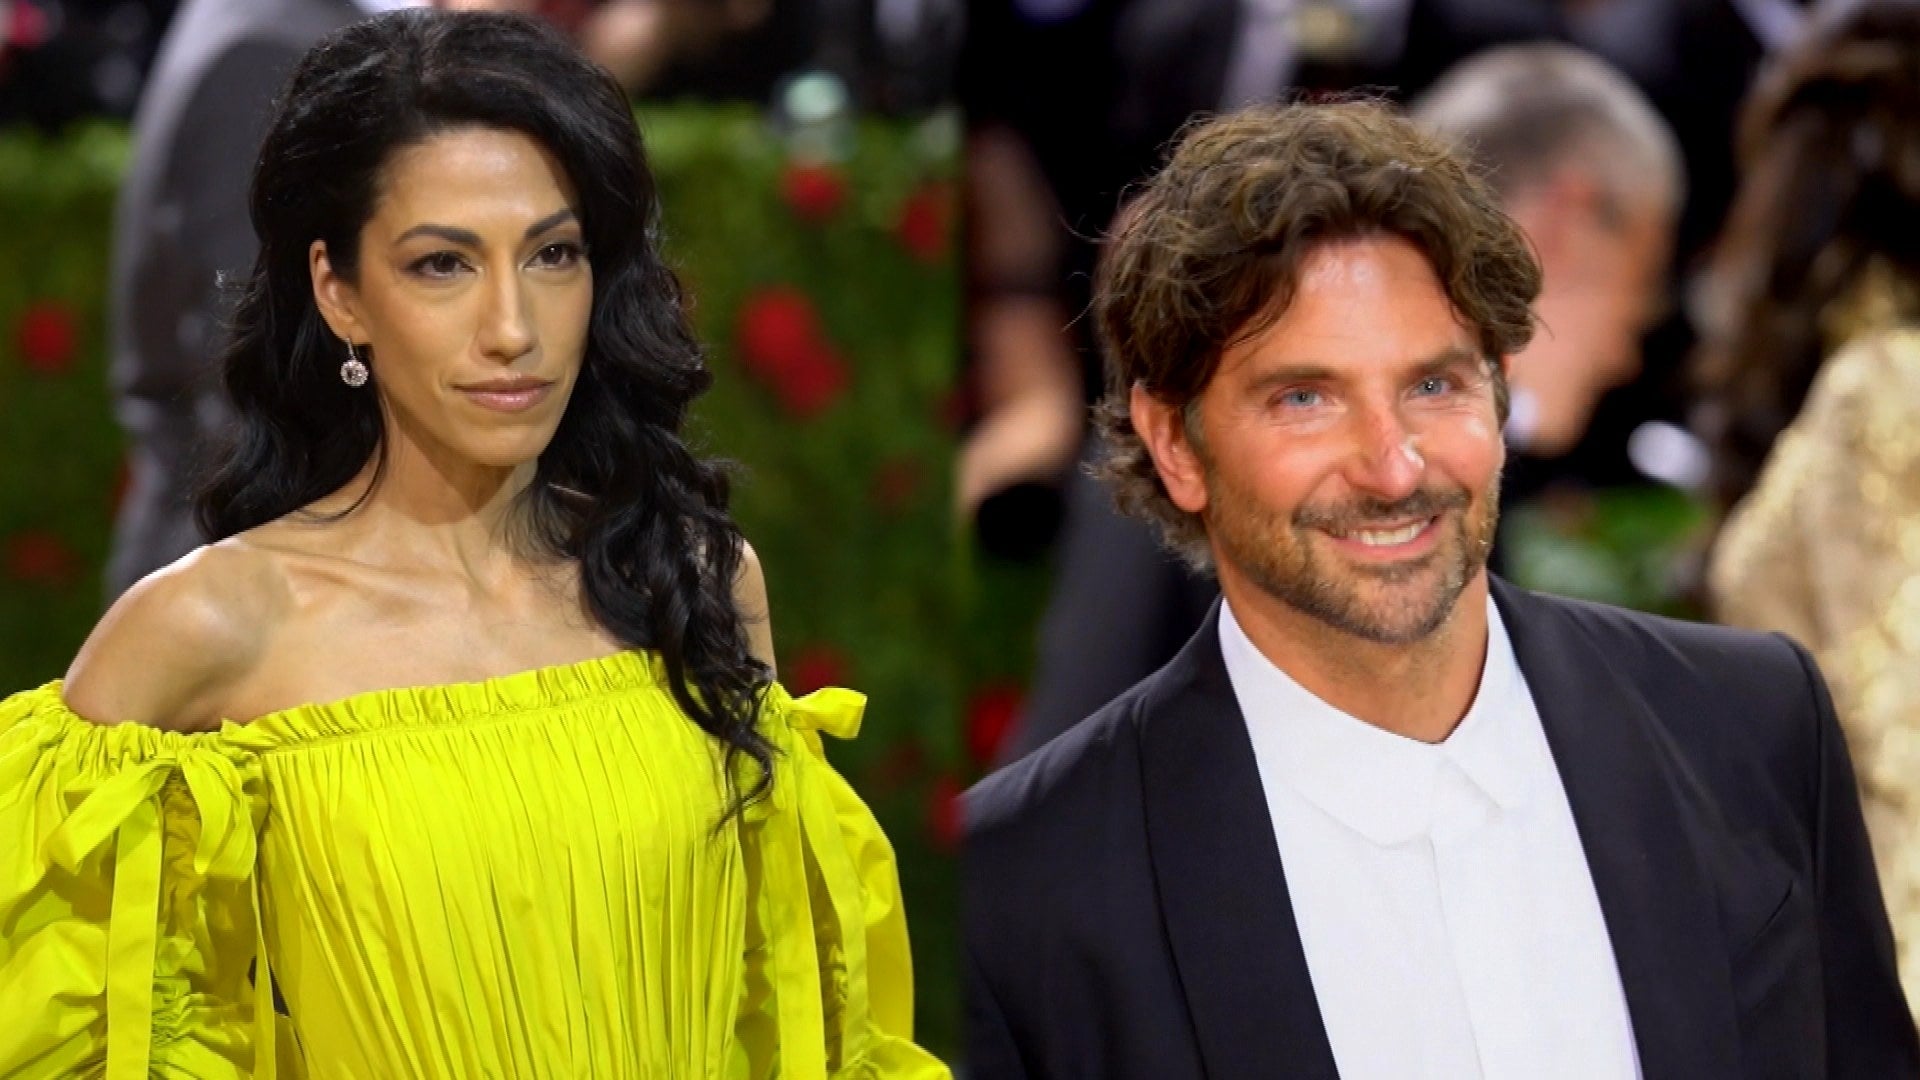 Bradley Cooper Is Taken Again, The Star Has Found Love In Hillary Clinton's  Top Aide Huma Abedin?